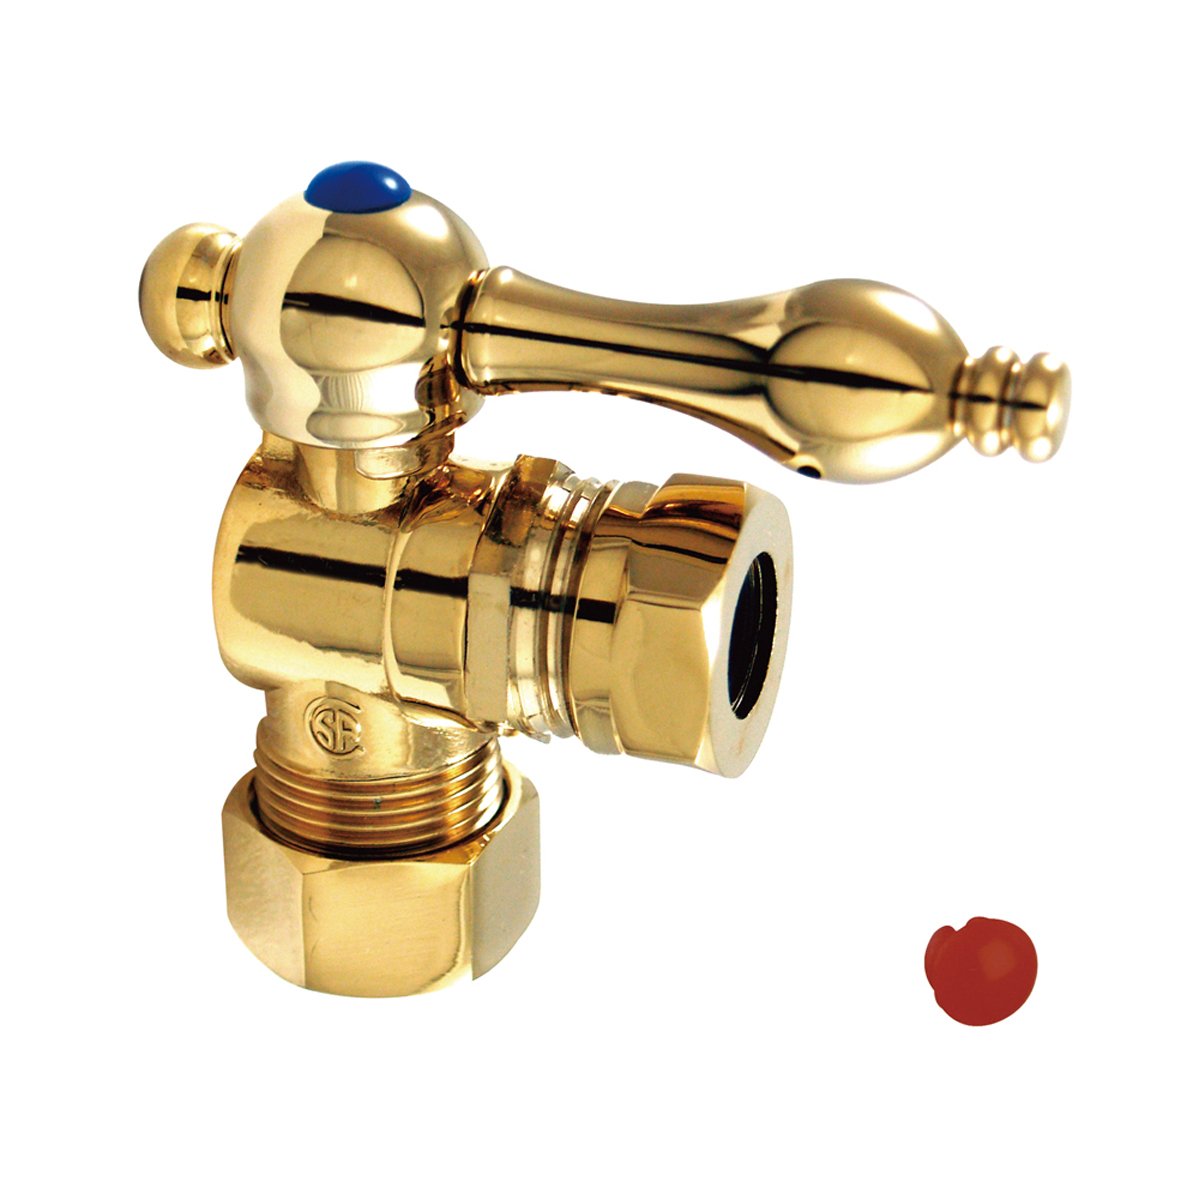 Kingston Brass Vintage Classic Angle Stop with 5/8" OD Compression x 1/2" or 7/16" Slip Joint-Bathroom Accessories-Free Shipping-Directsinks.